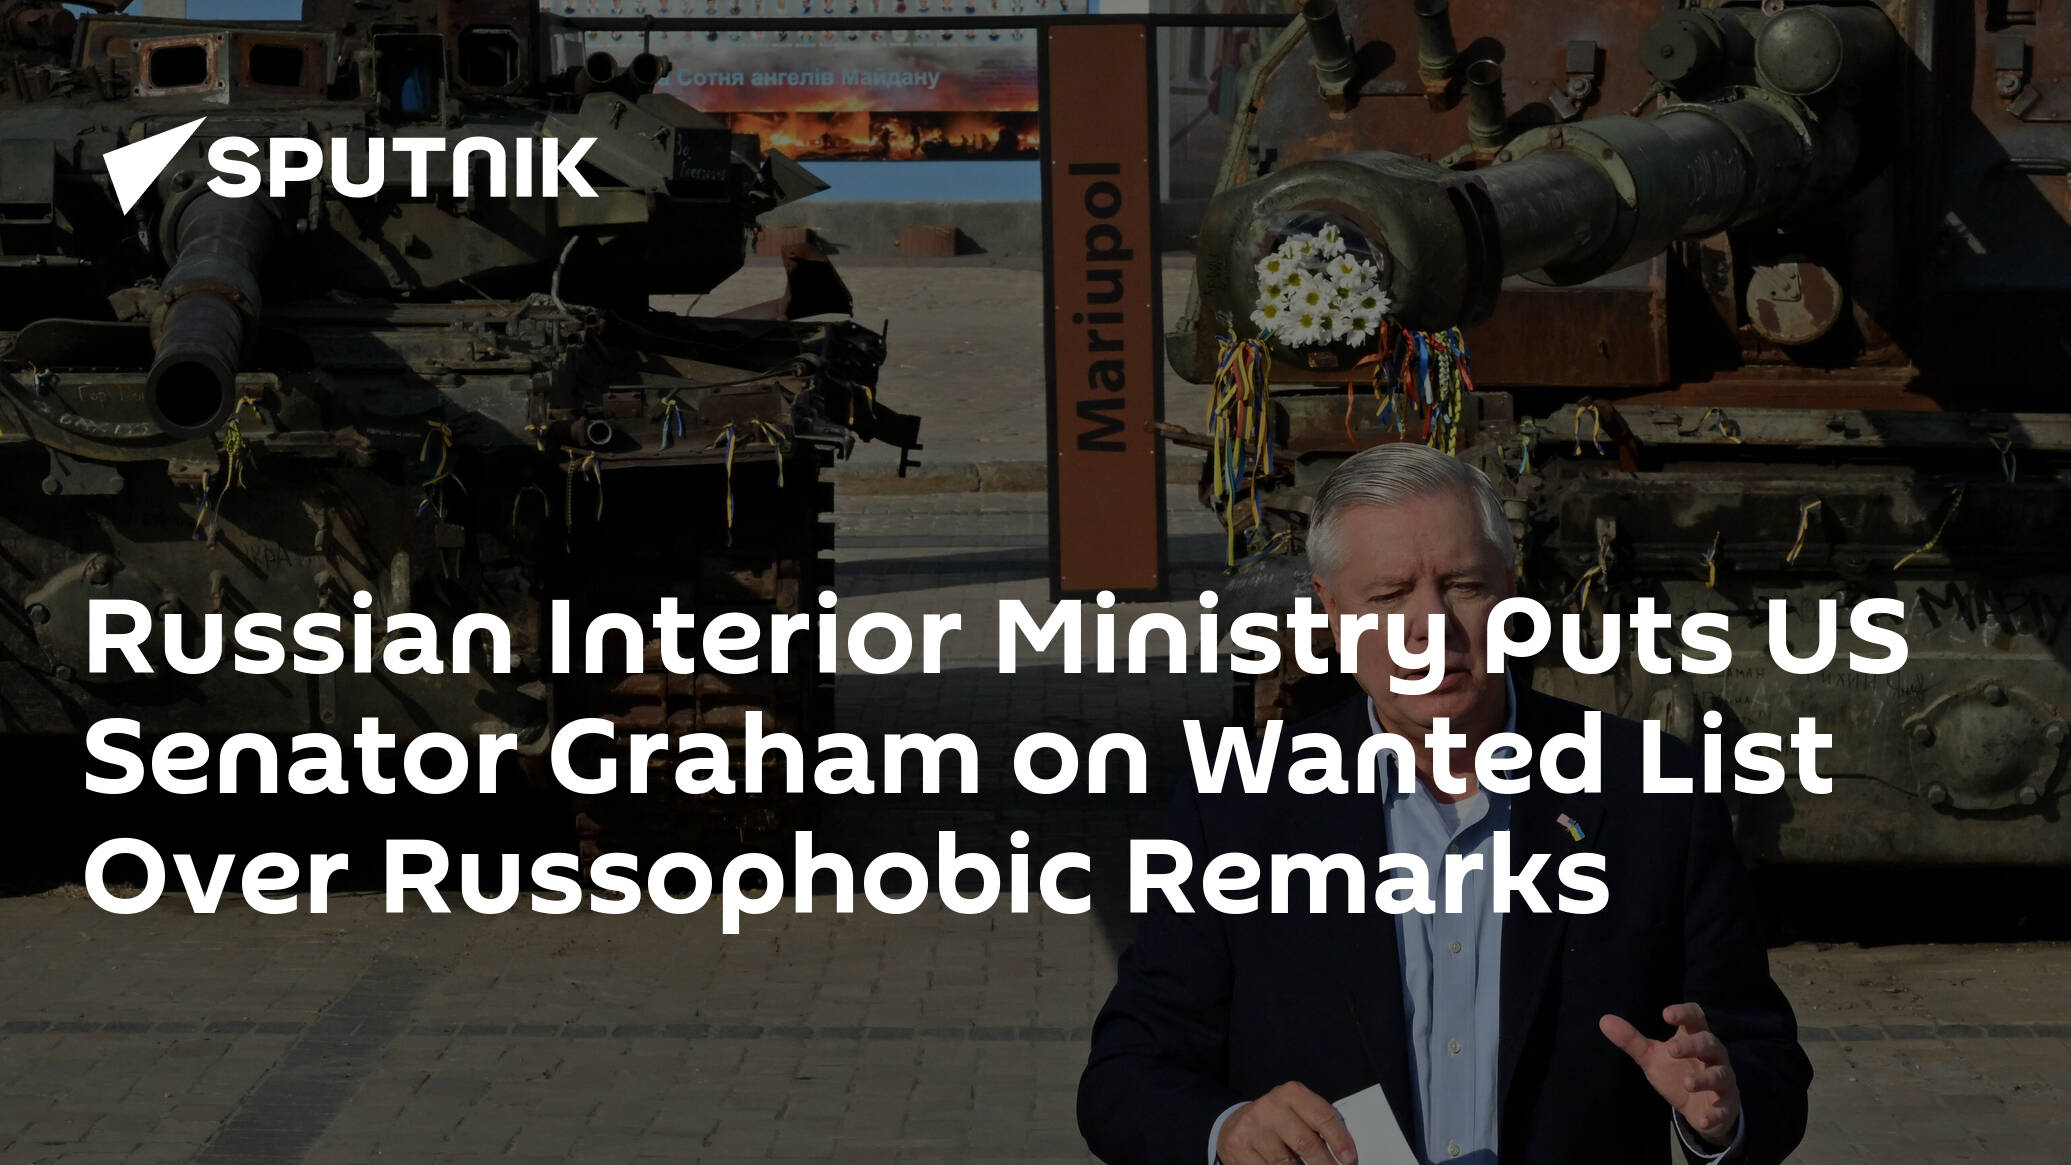 Russian Interior Ministry Puts US Senator Graham on Wanted List Over Russophobic Remarks